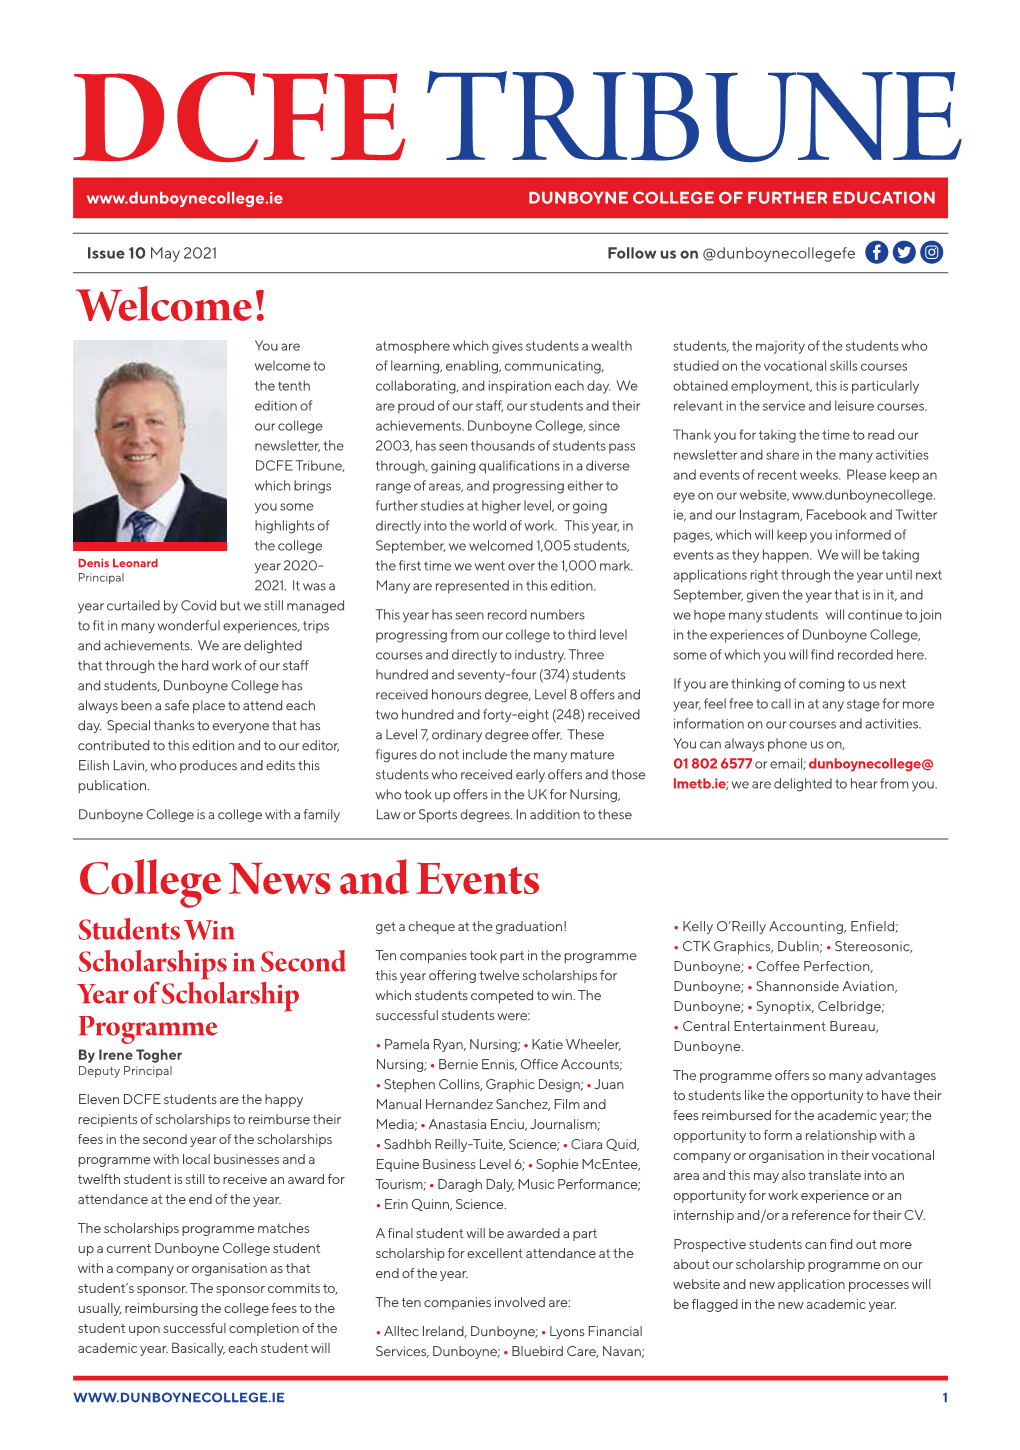 College News and Events